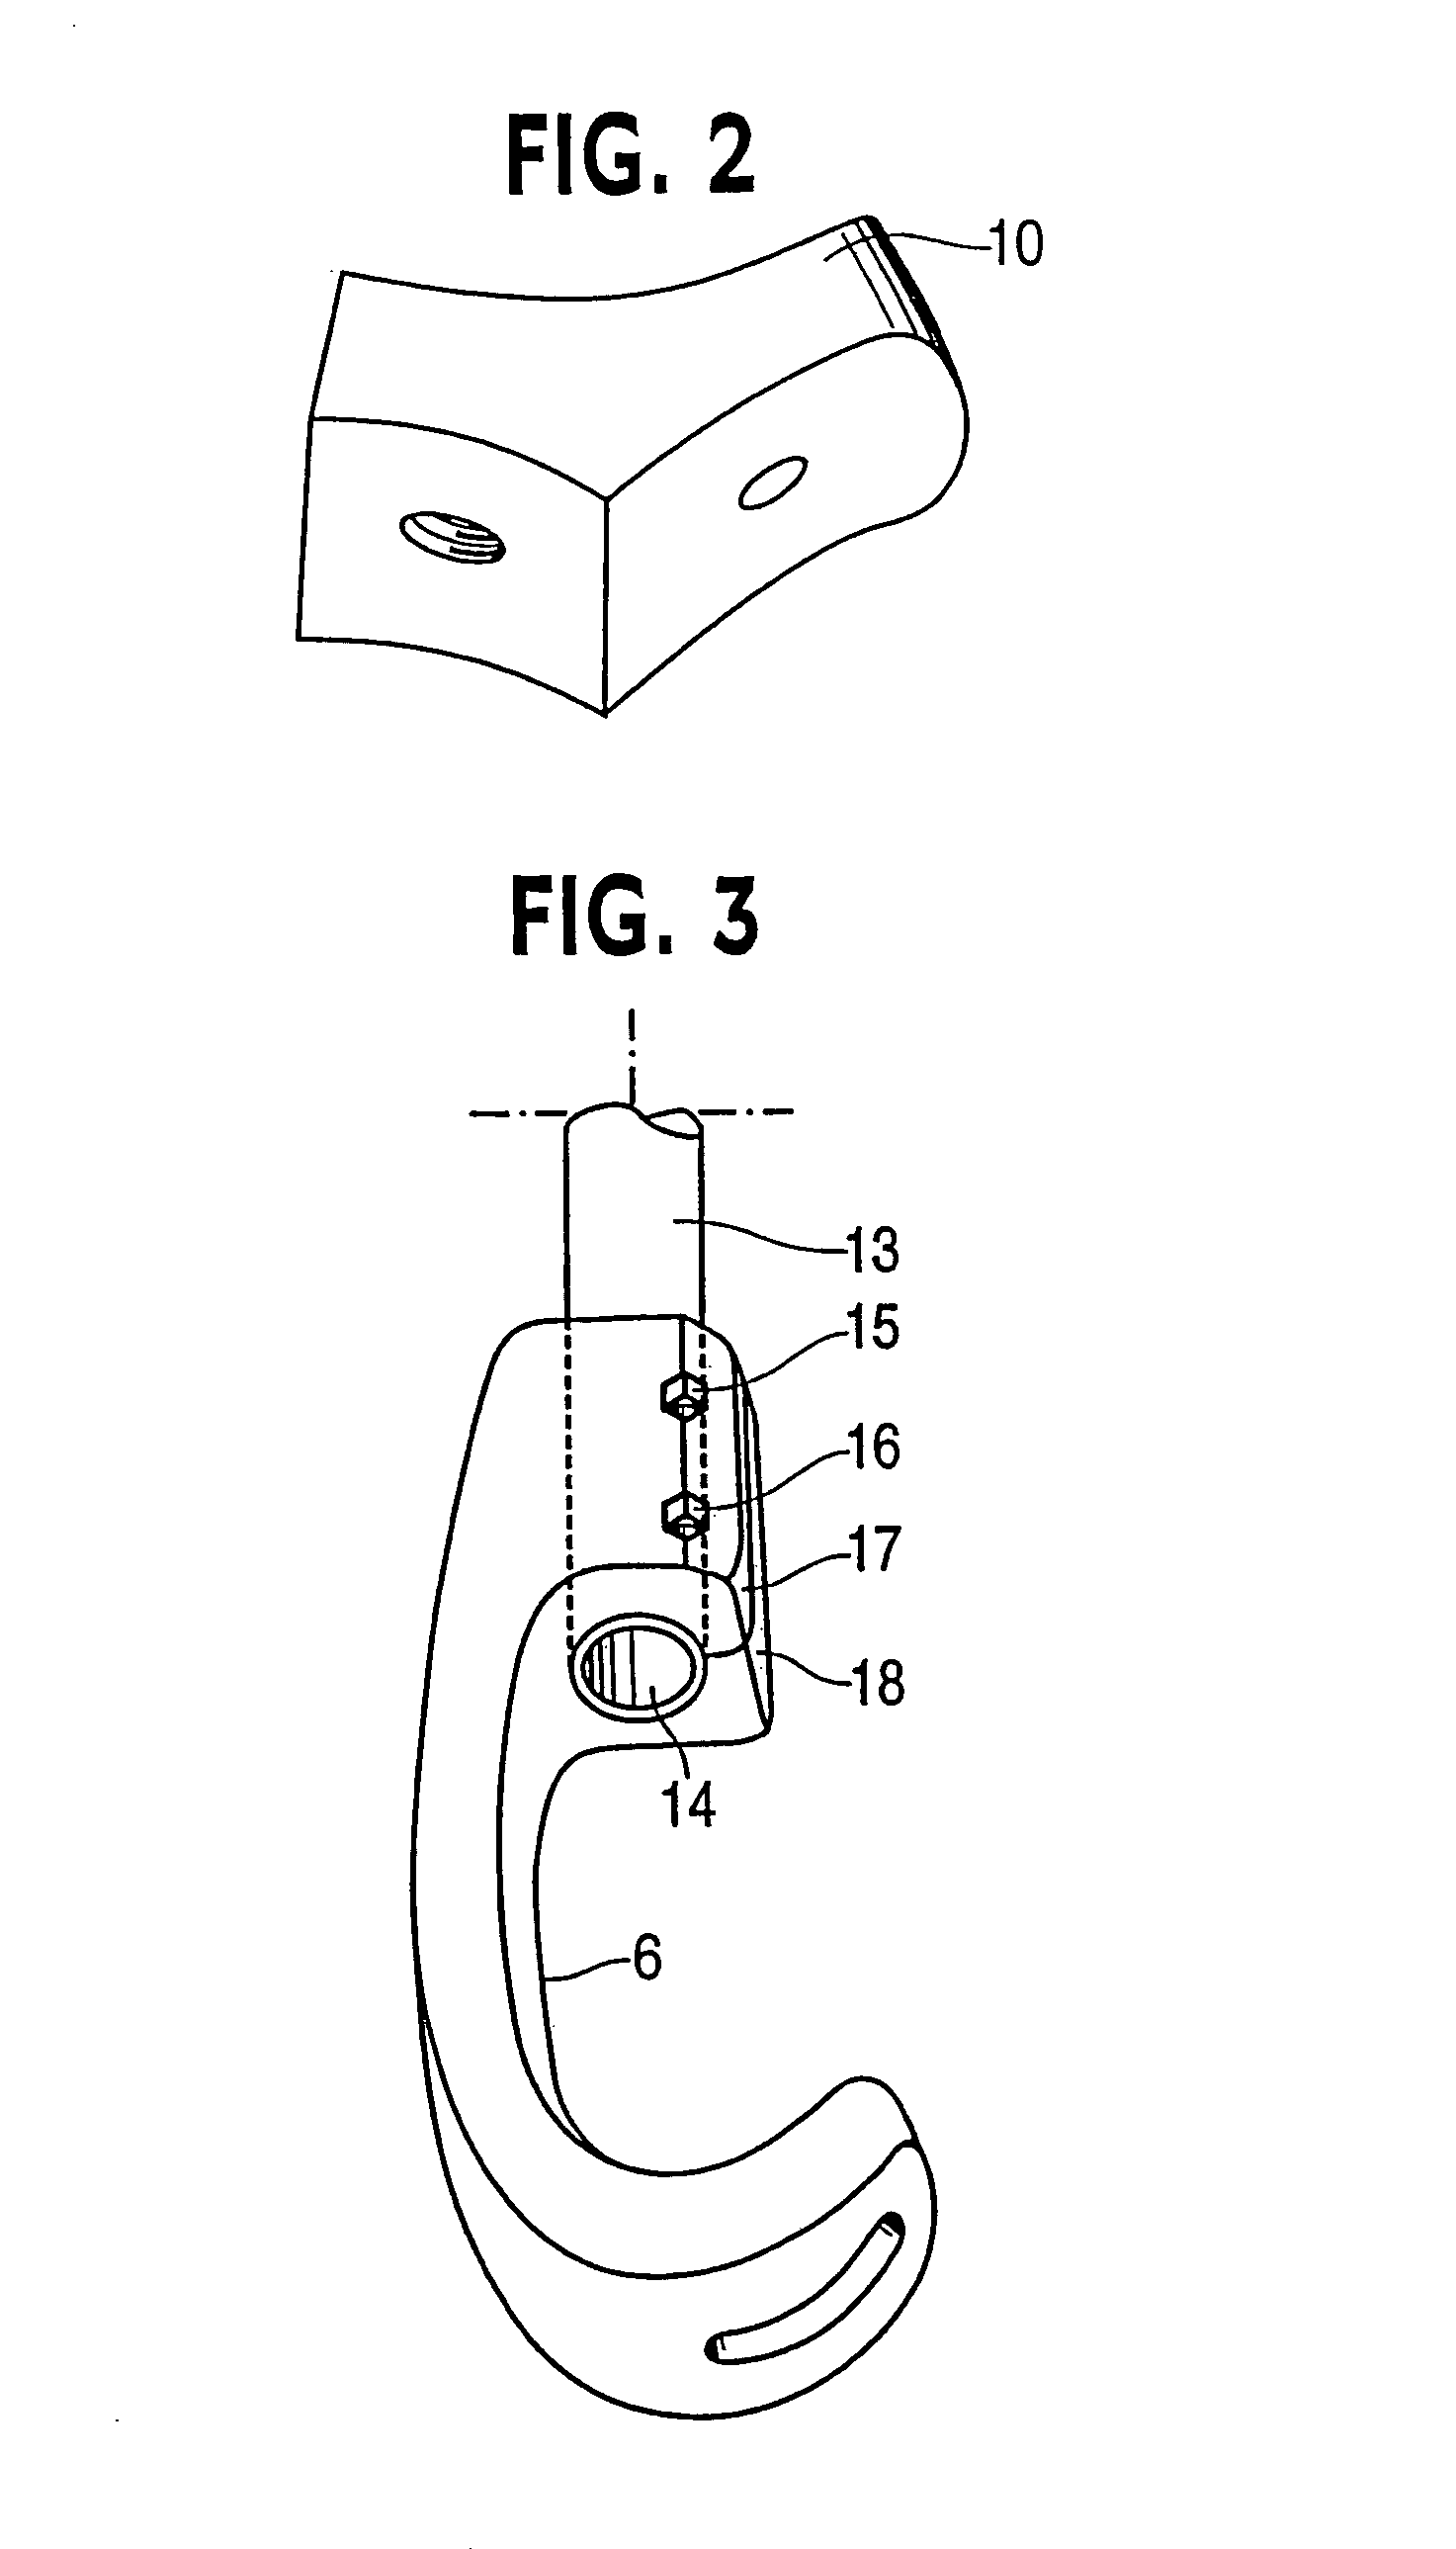 Mobility assistance apparatus